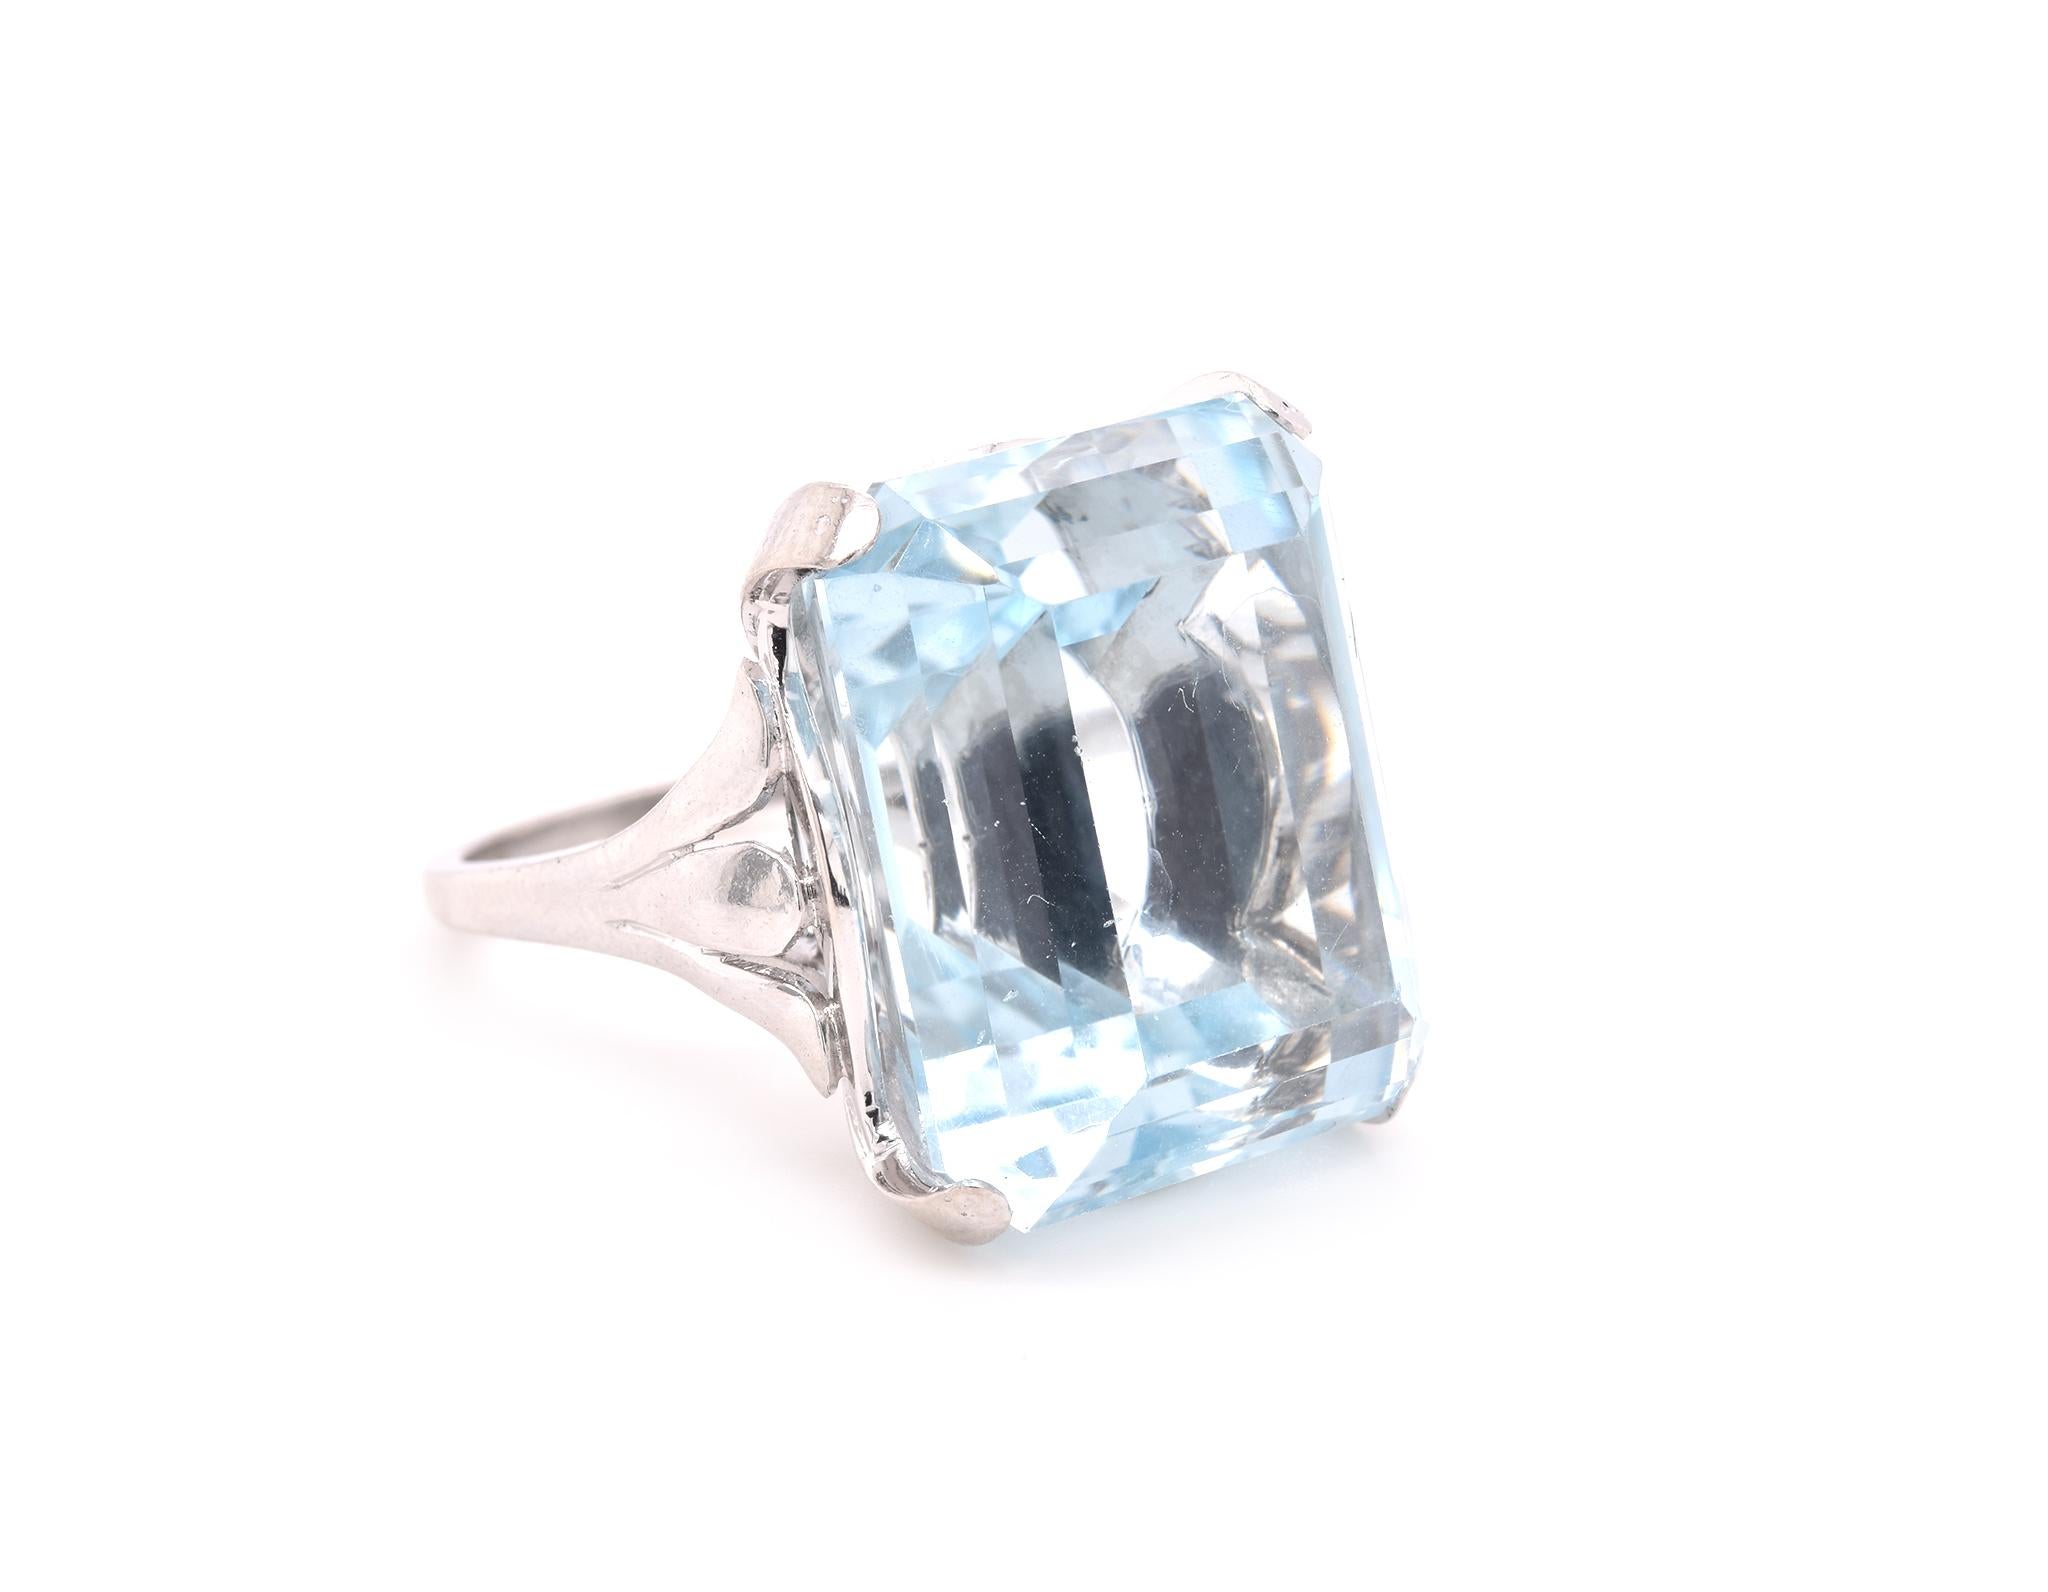 Designer: custom
Material: platinum
Blue Topaz: 1 emerald cut = 35.40ct
Ring Size: 6.5 (please allow up to 2 additional business days for sizing requests)
Dimensions: ring top measures 19.5mm X 16mm
Weight:  17.79 grams	